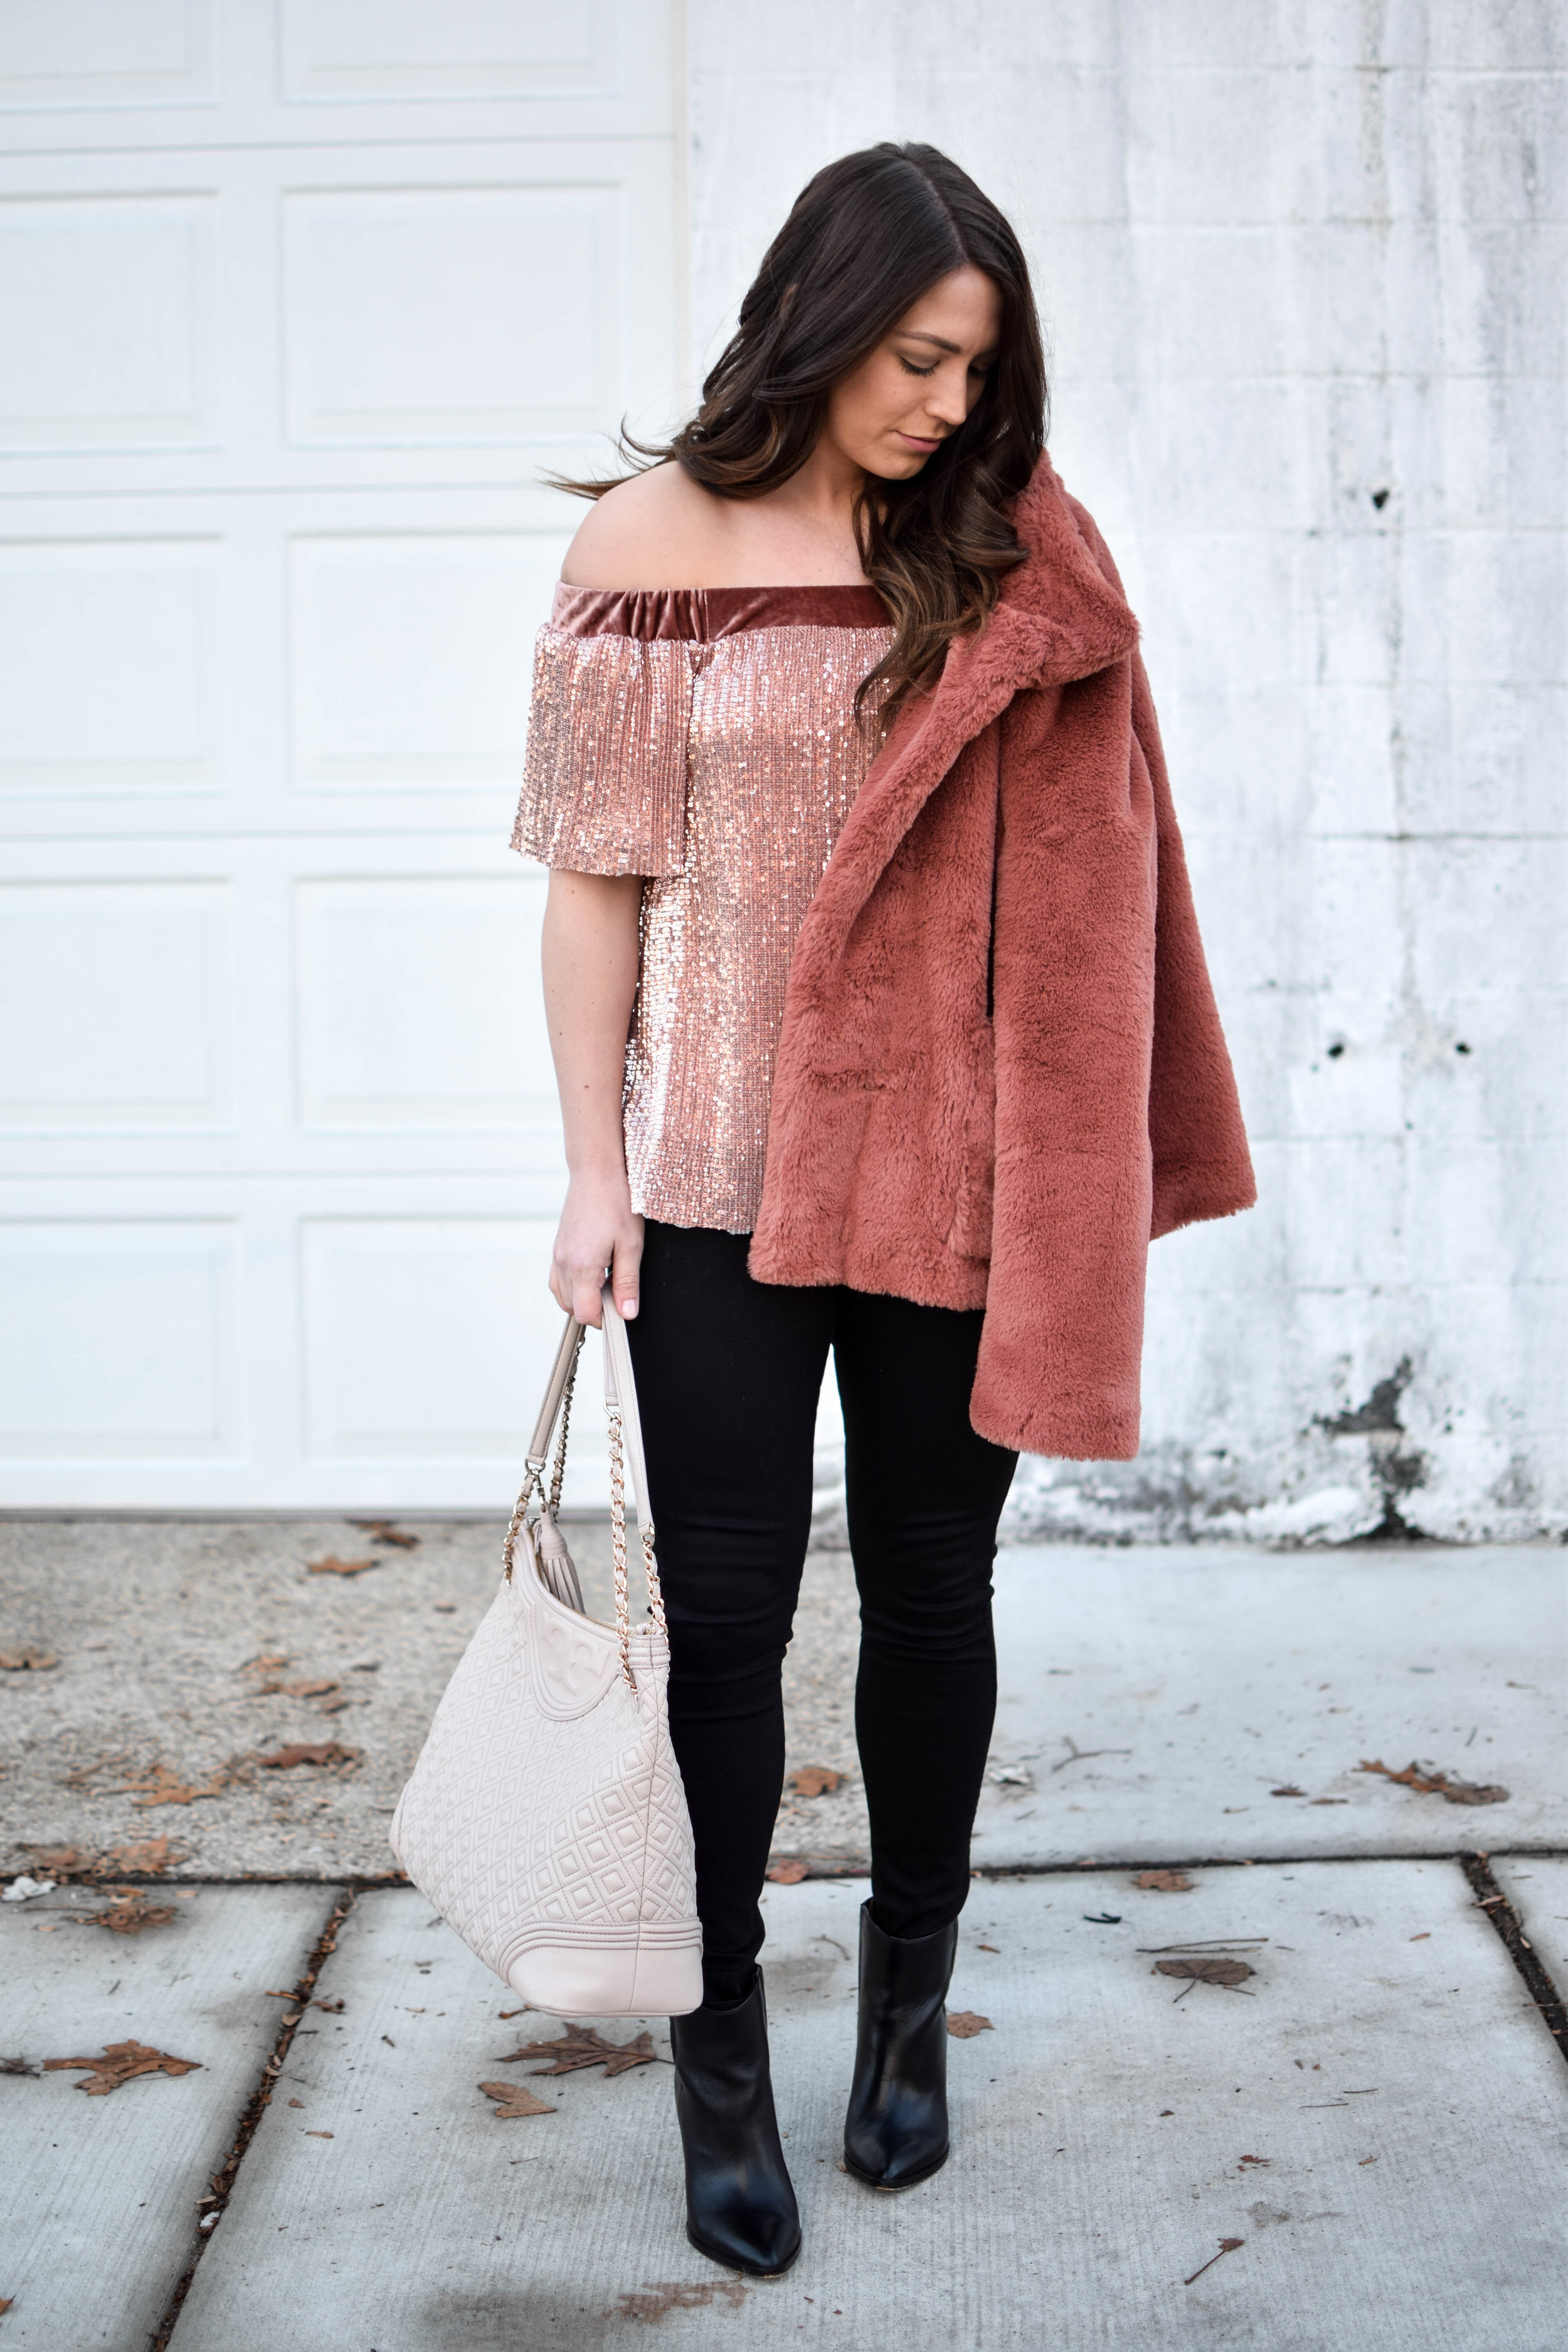 Holiday Outfit Idea #2: Chenille Ruffle Sleeve Sweater